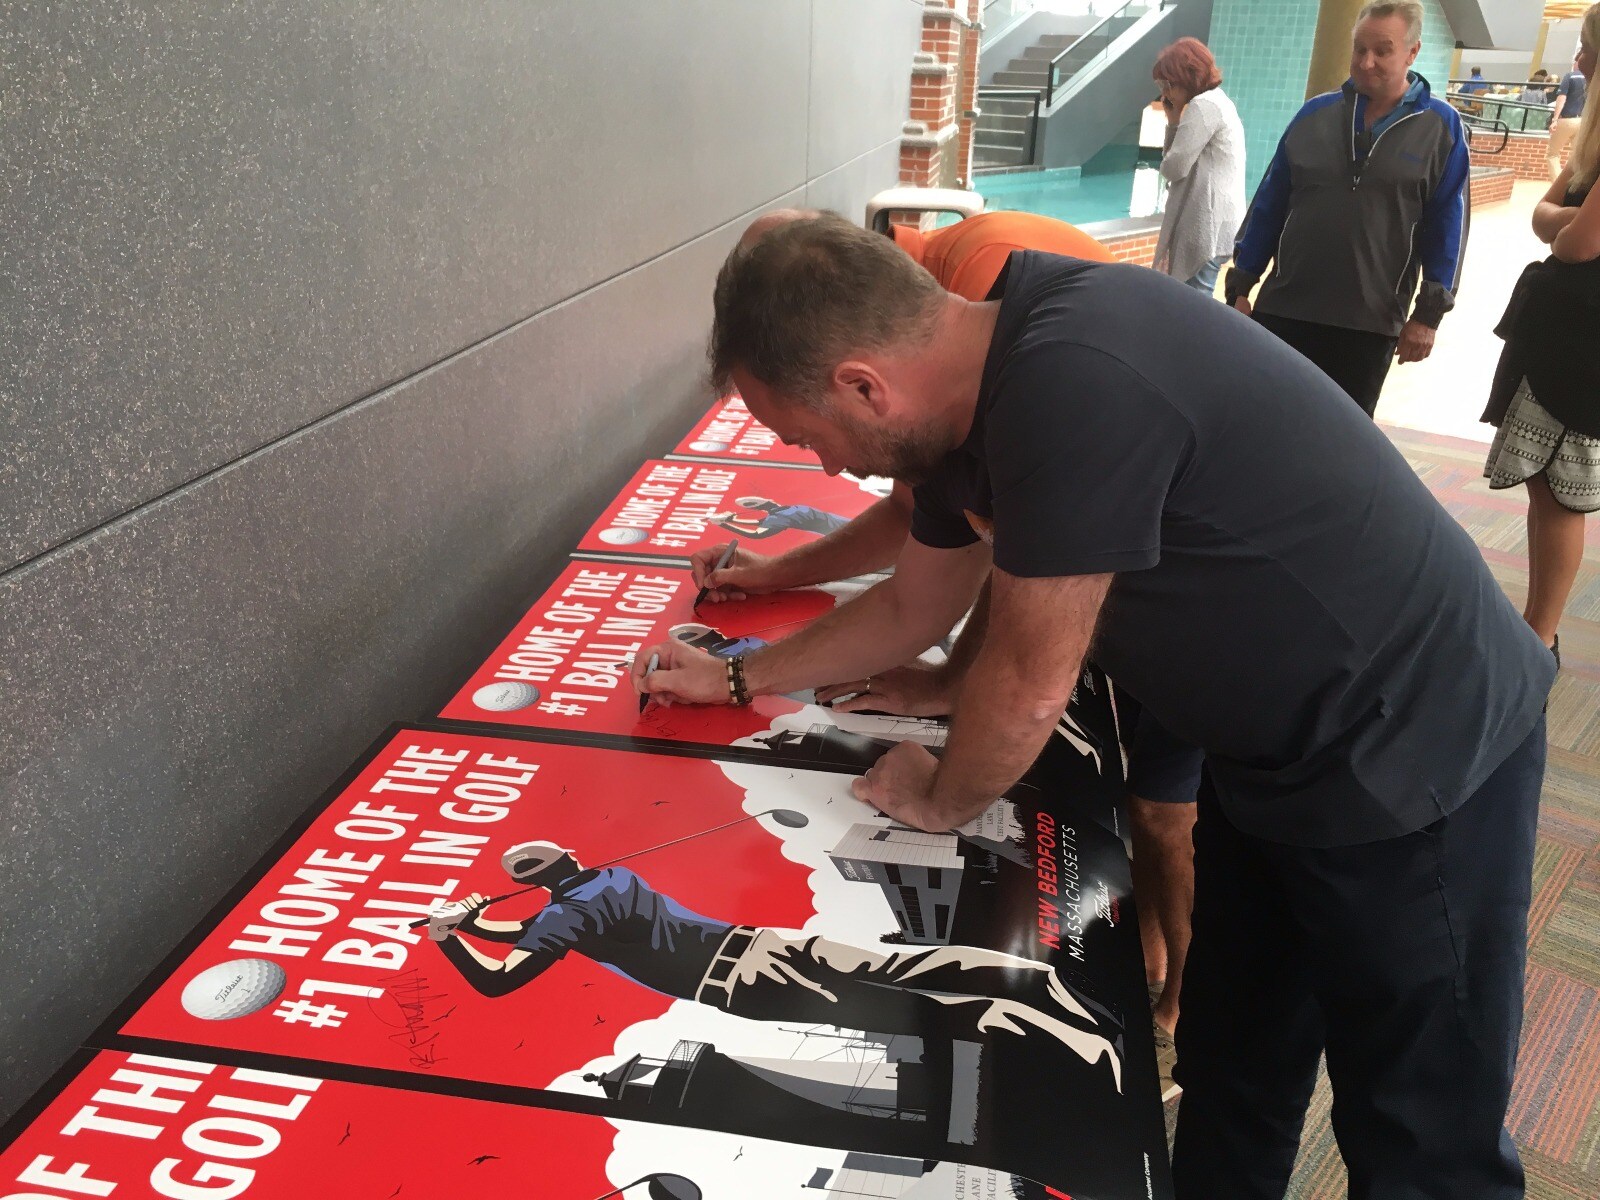 Signing promotional posters.